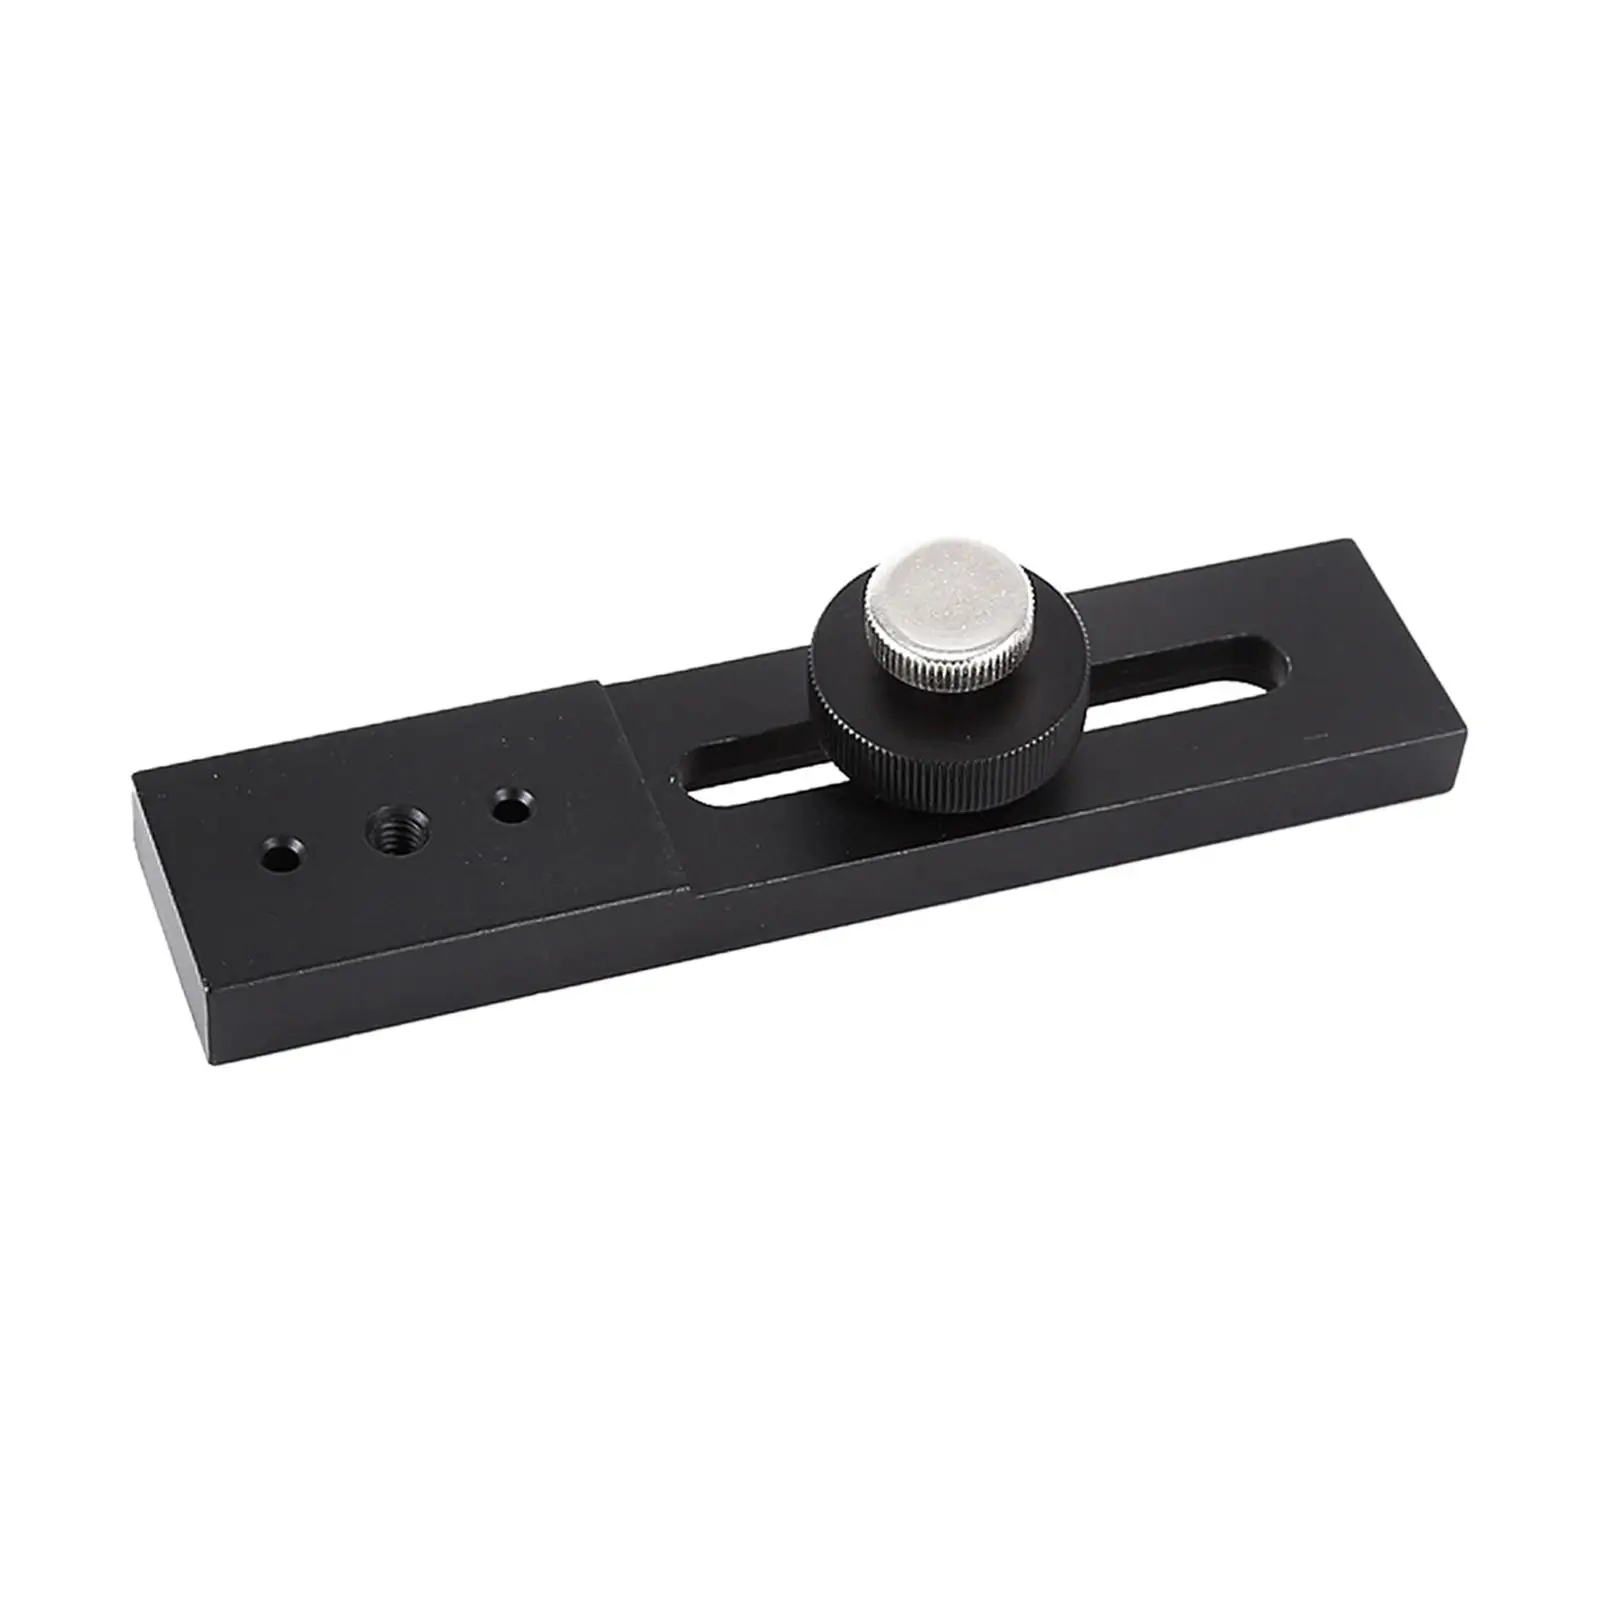 Dovetail Mount Plate Adapter Accessory for Binocular Finder Scope Telescope